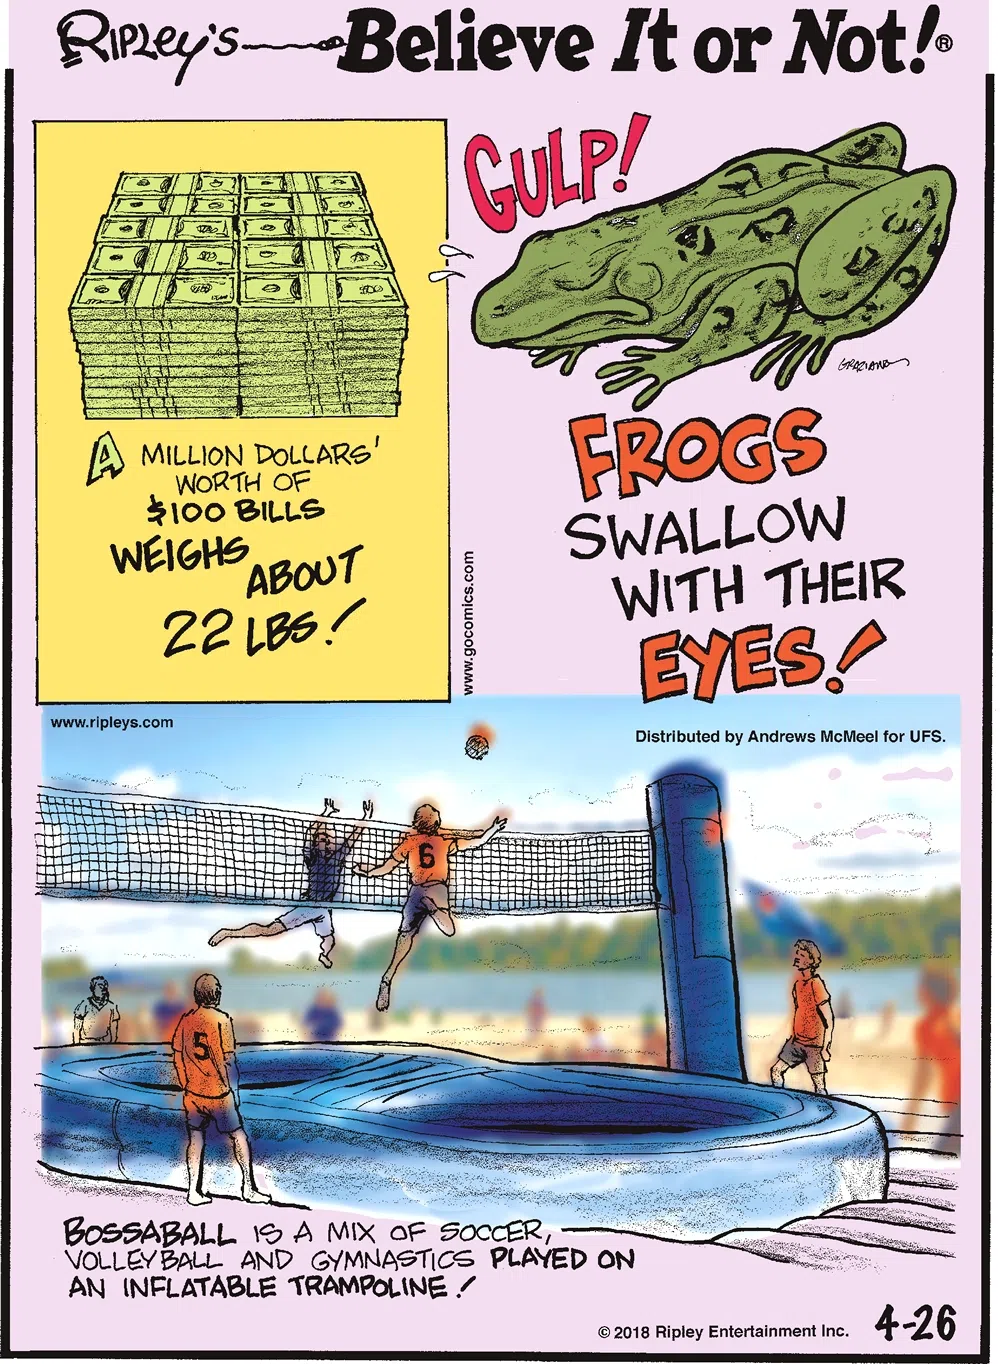 A million dollars' worth of $100 bills weighs about 22 lbs!-------------------- Frogs swallow with their eyes!-------------------- Bossaball is a mix of soccer, volleyball, and gymnastics played on an inflatable trampoline!